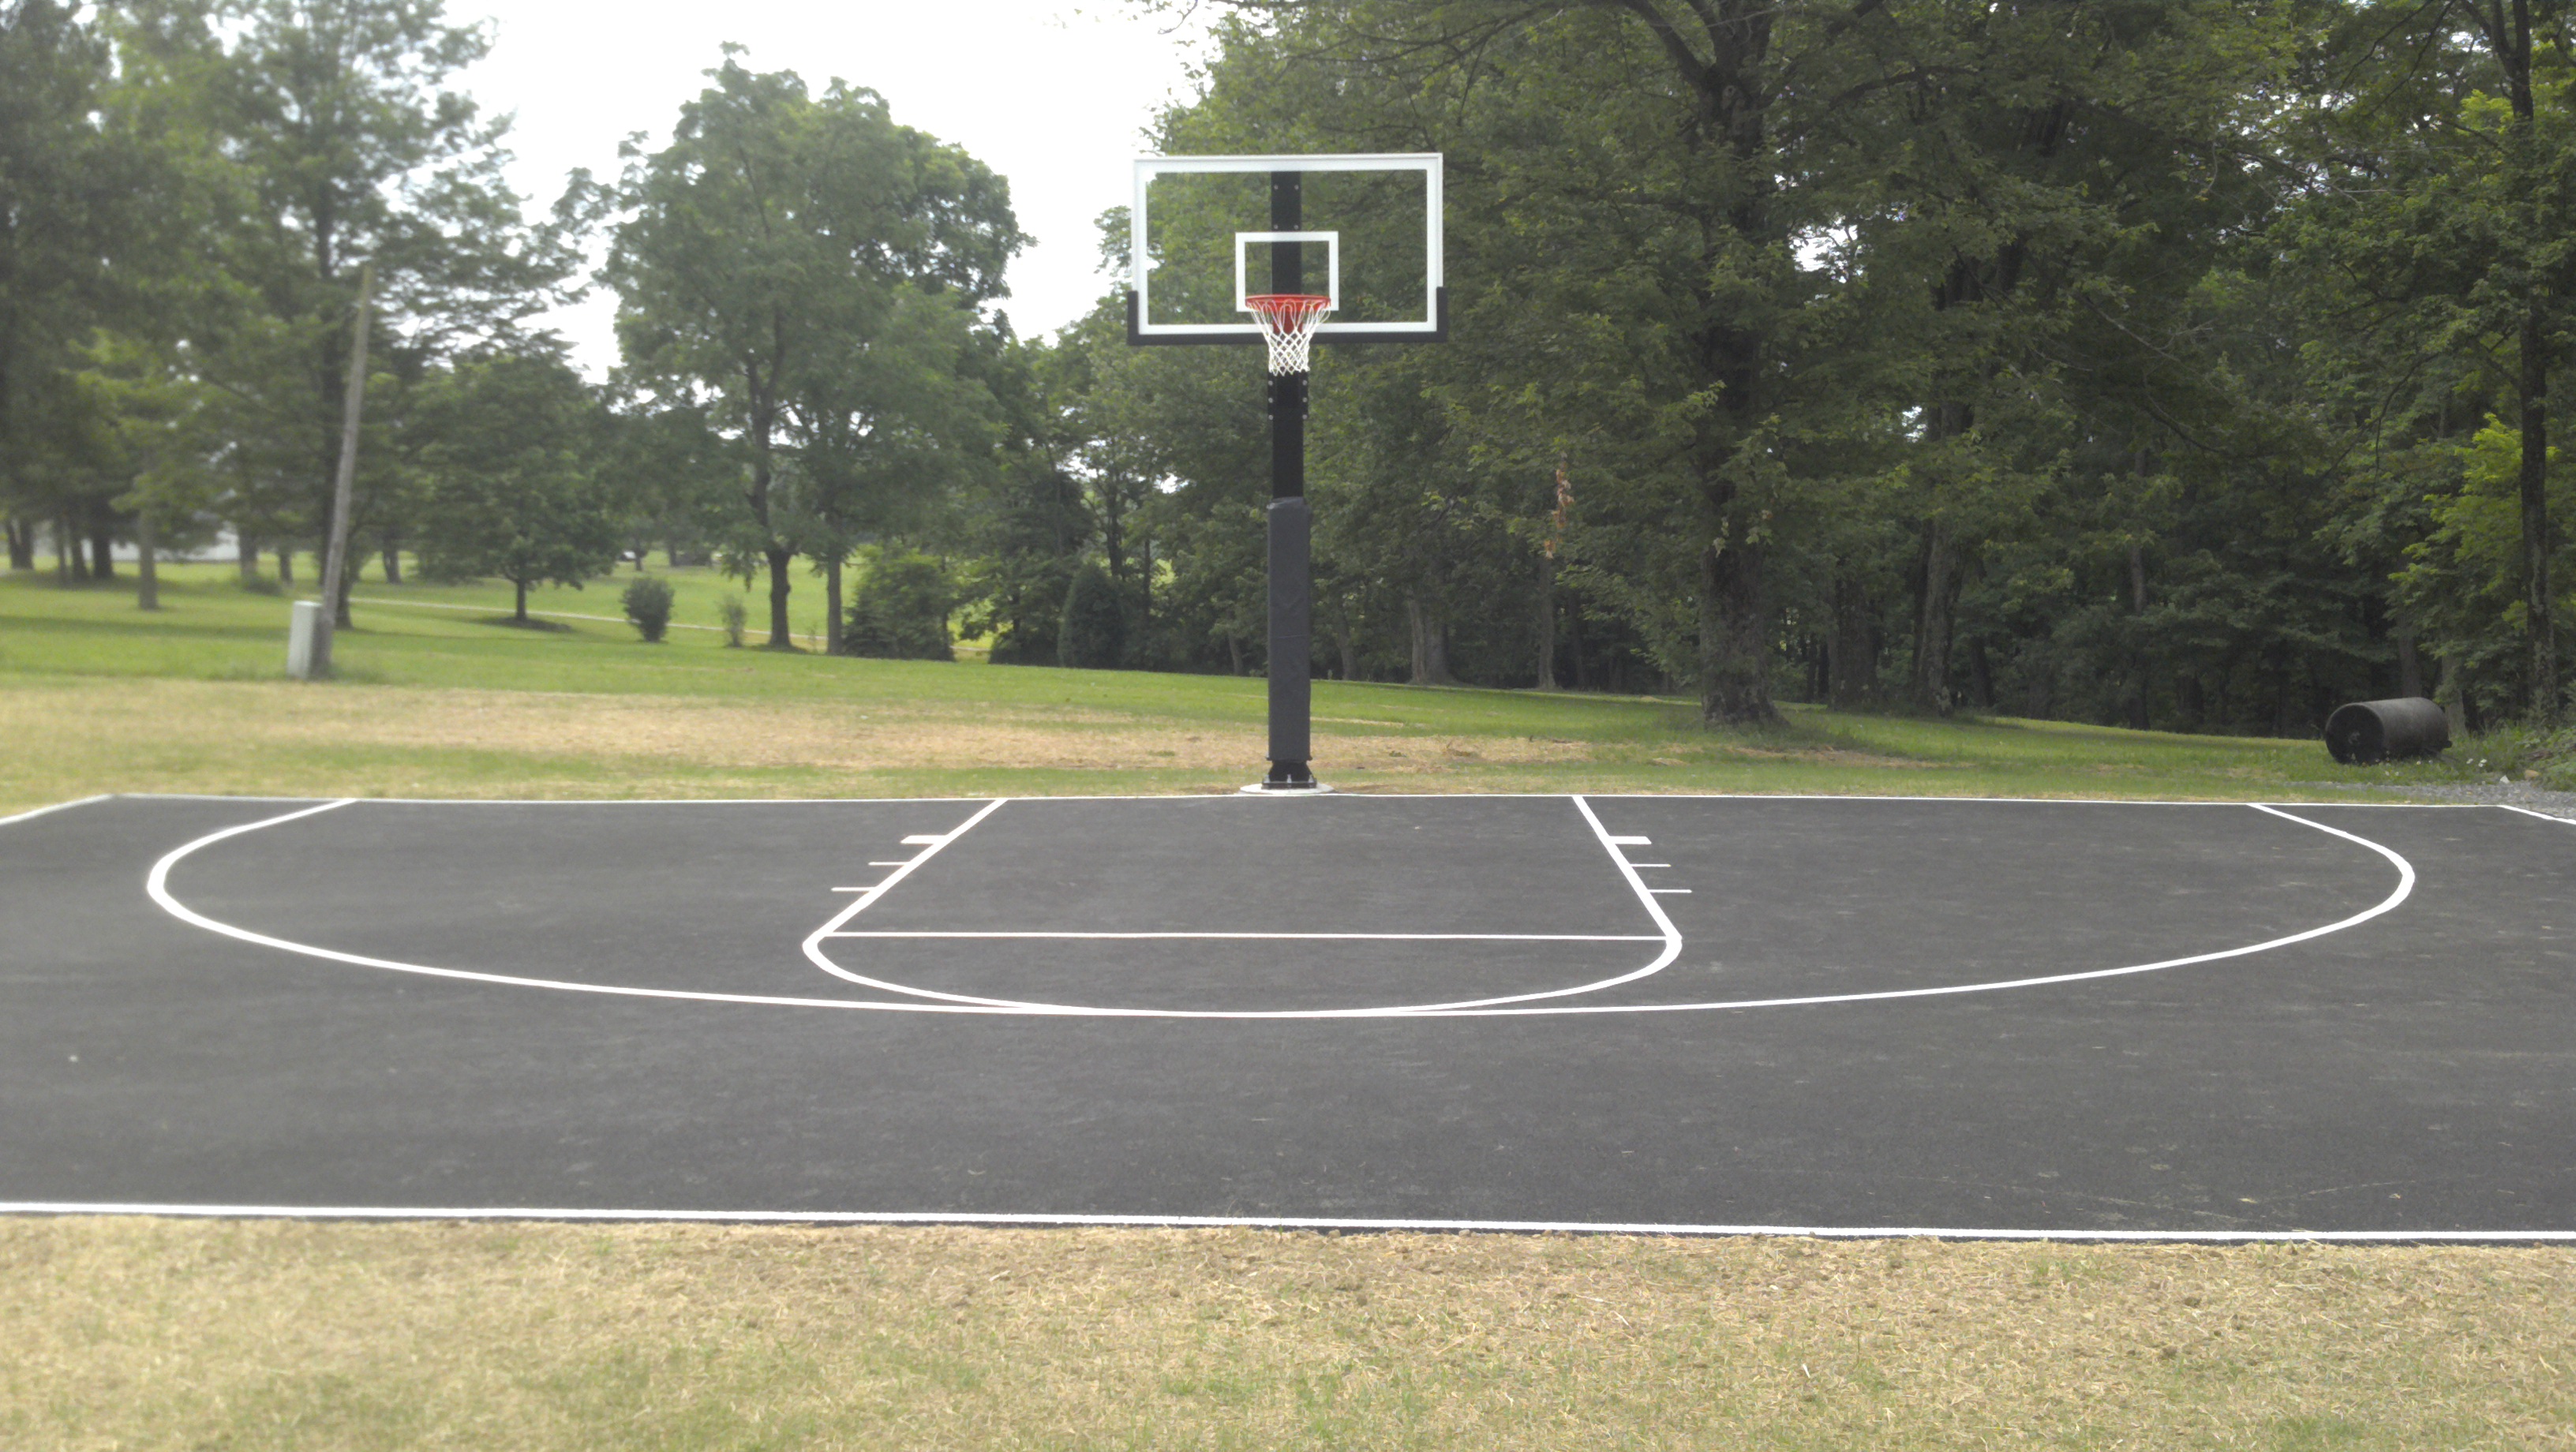 The Hercules Diamond basketball system is a perfect match for this ...